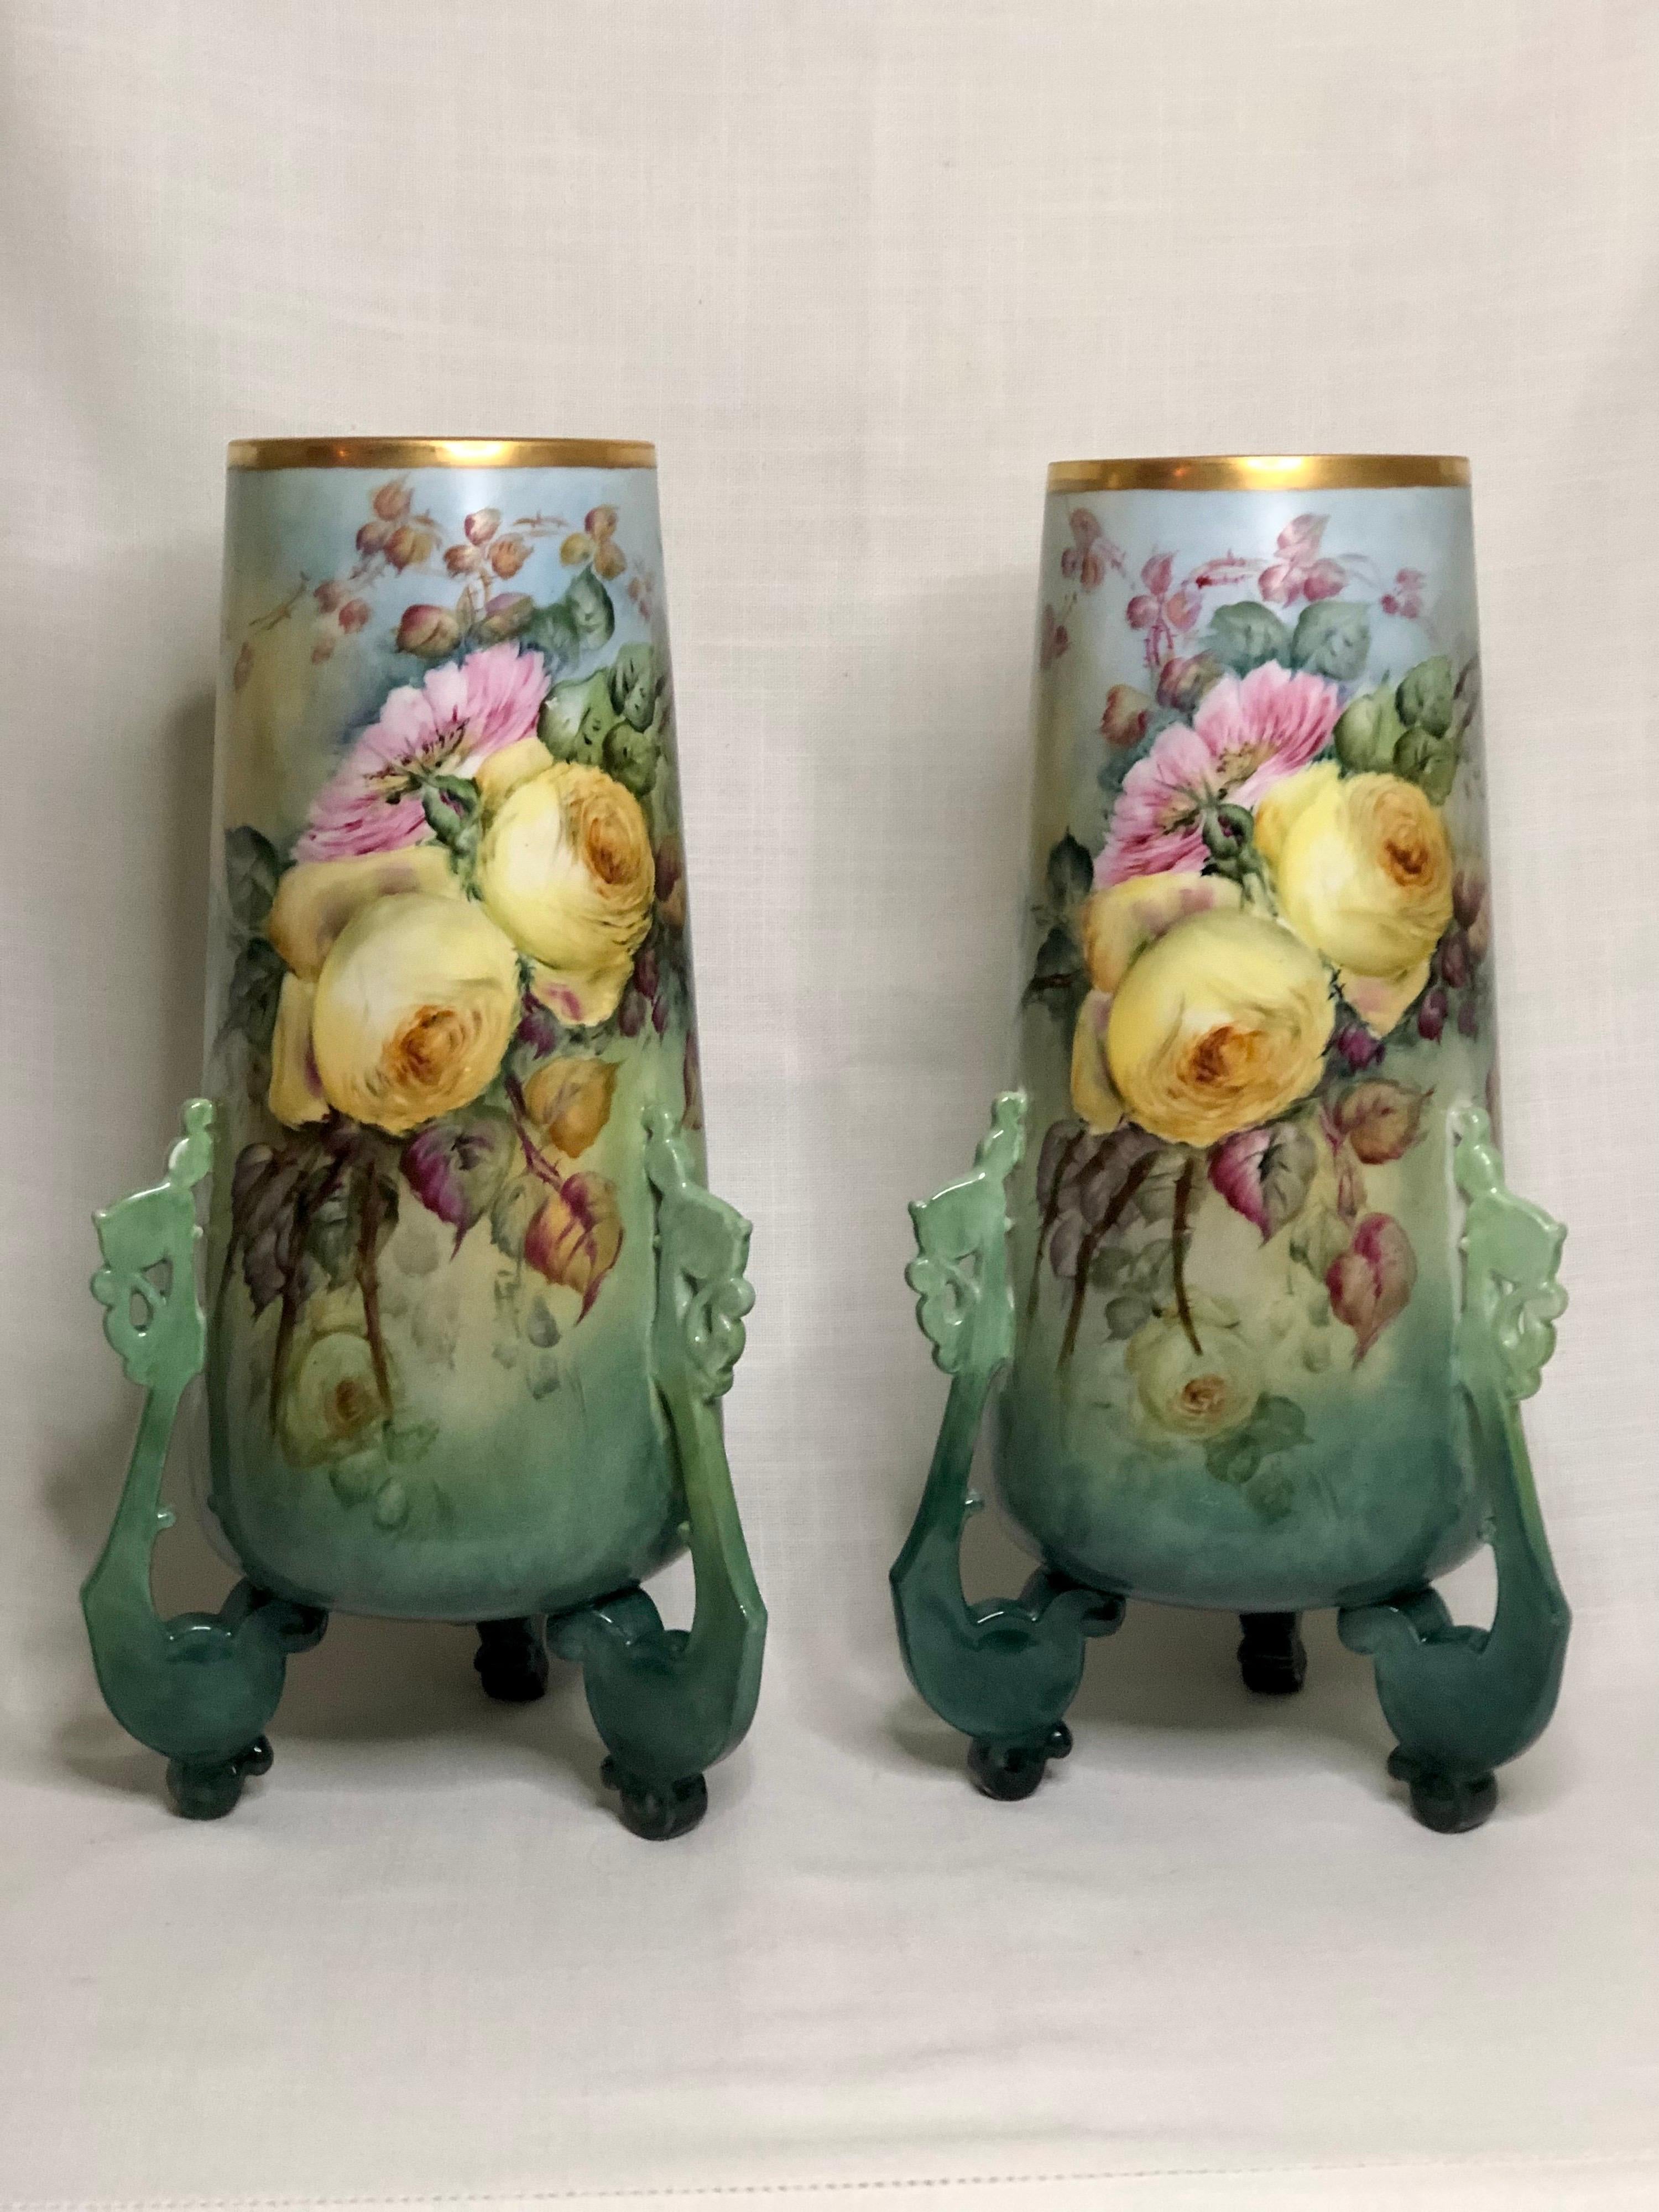 This is a magnificent pair of large Limoges porcelain vases, beautifully hand painted with yellow roses and pink peonies. They stand on three unusual feet as you can see in the attached pictures. It is very rare to find a pair of Limoges vases as